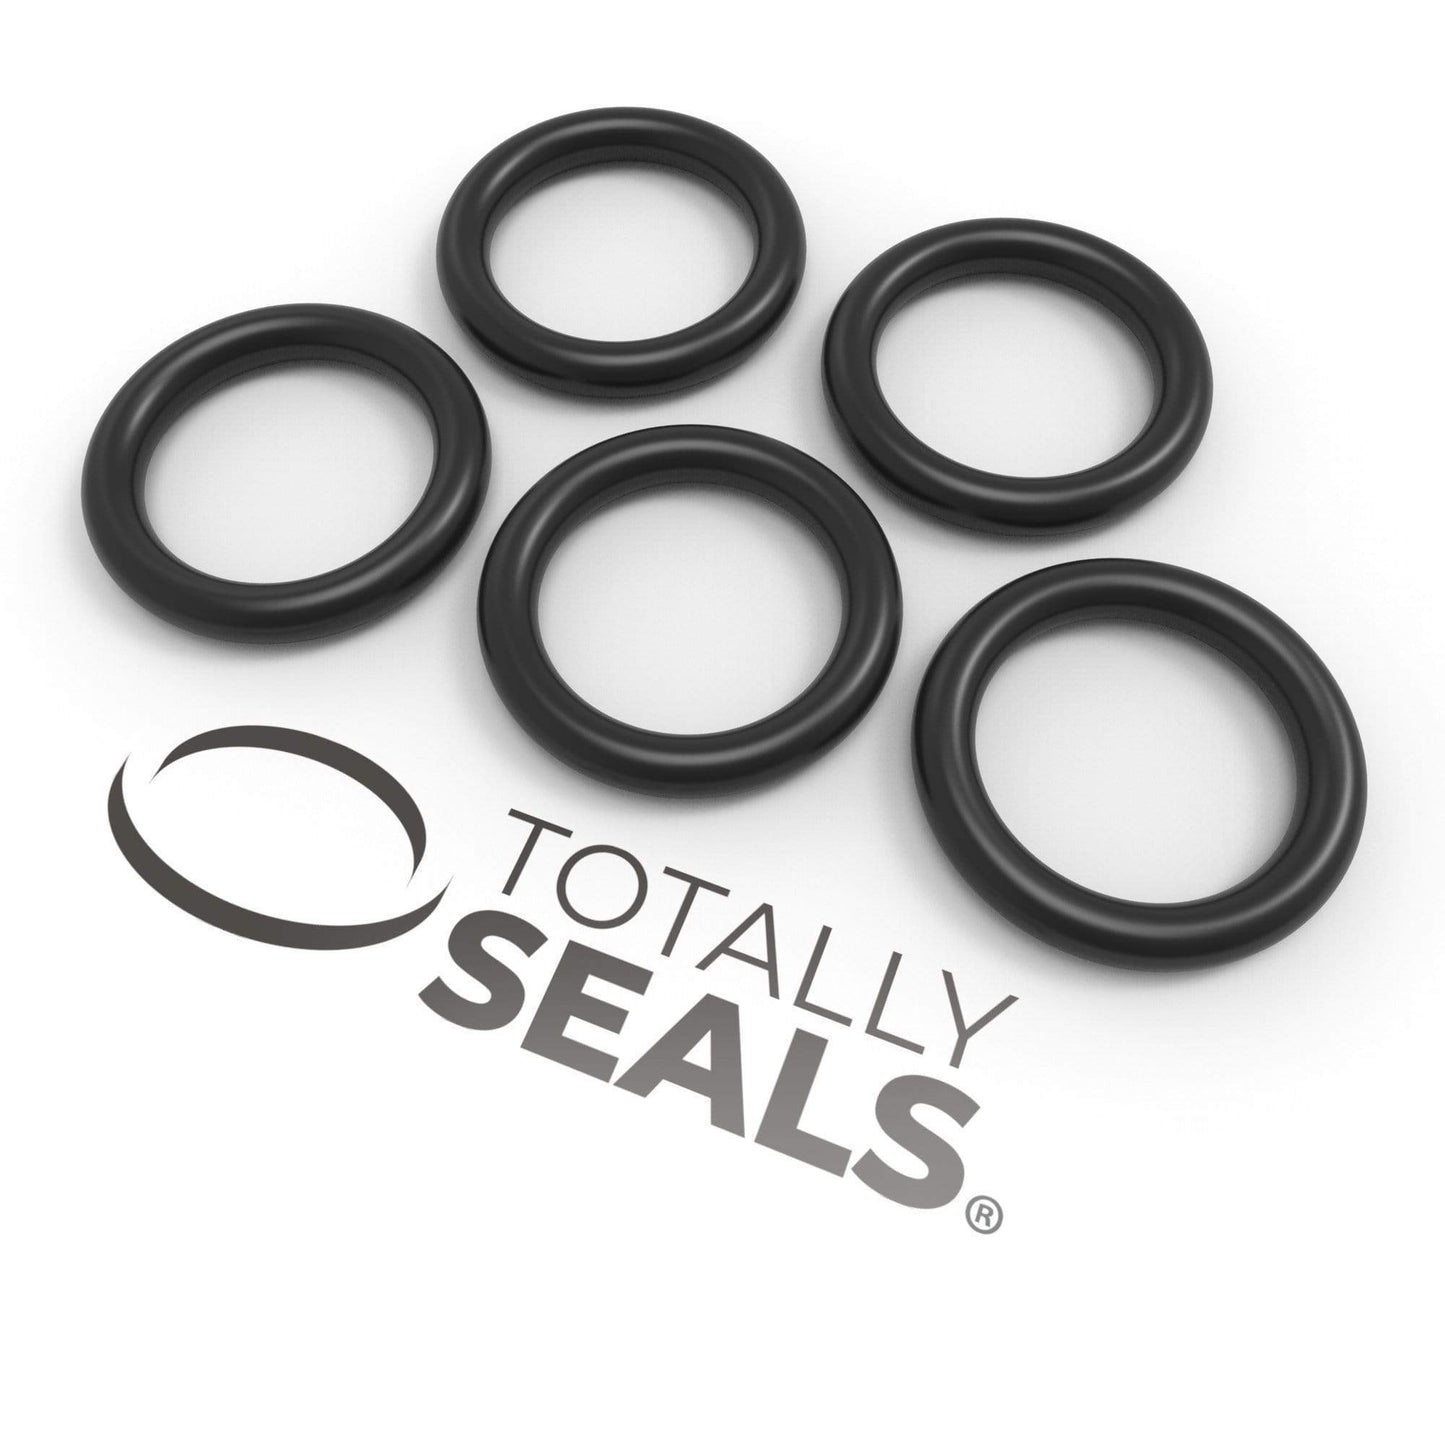 1-3/4" x 3/16" (BS327) Imperial Nitrile O-Rings - Totally Seals®